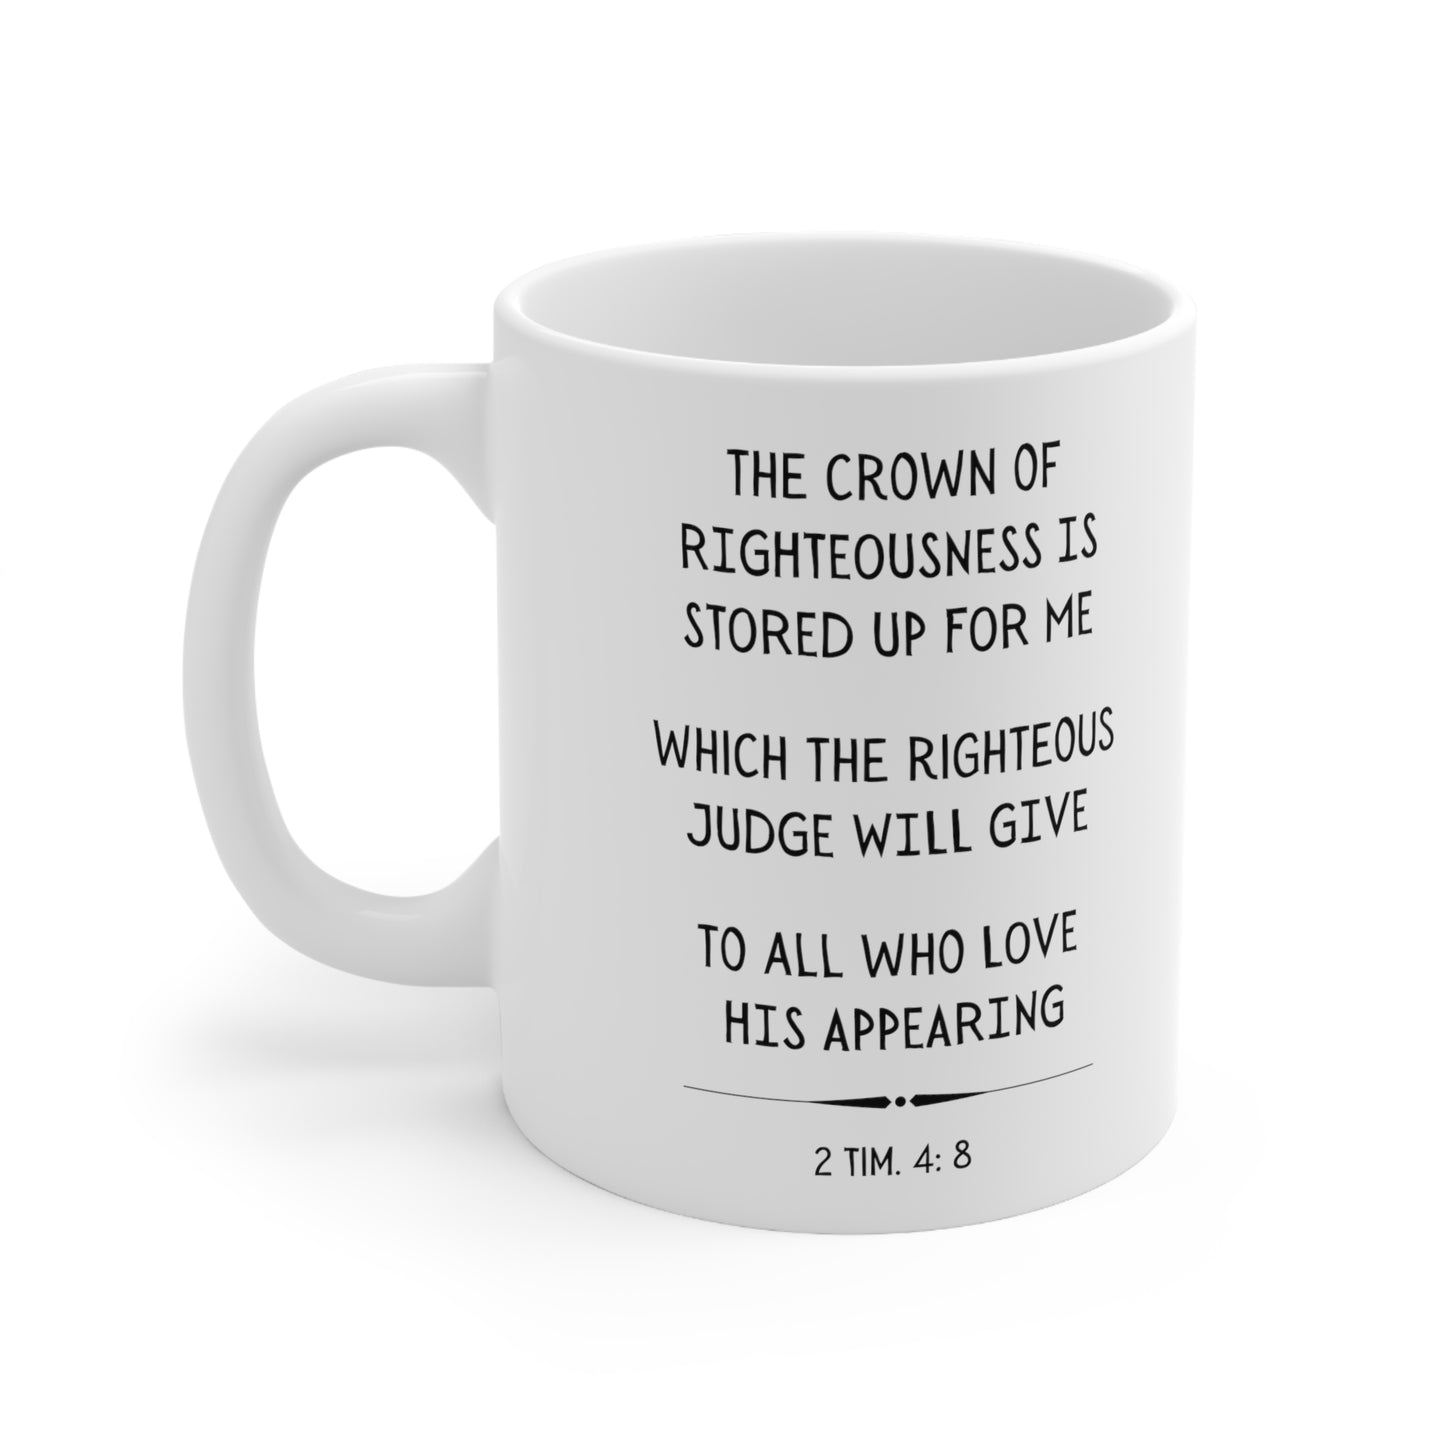 Scripture Mug, Crown of Righteousness Is Stored Up For Me, 2 Timothy 4:8